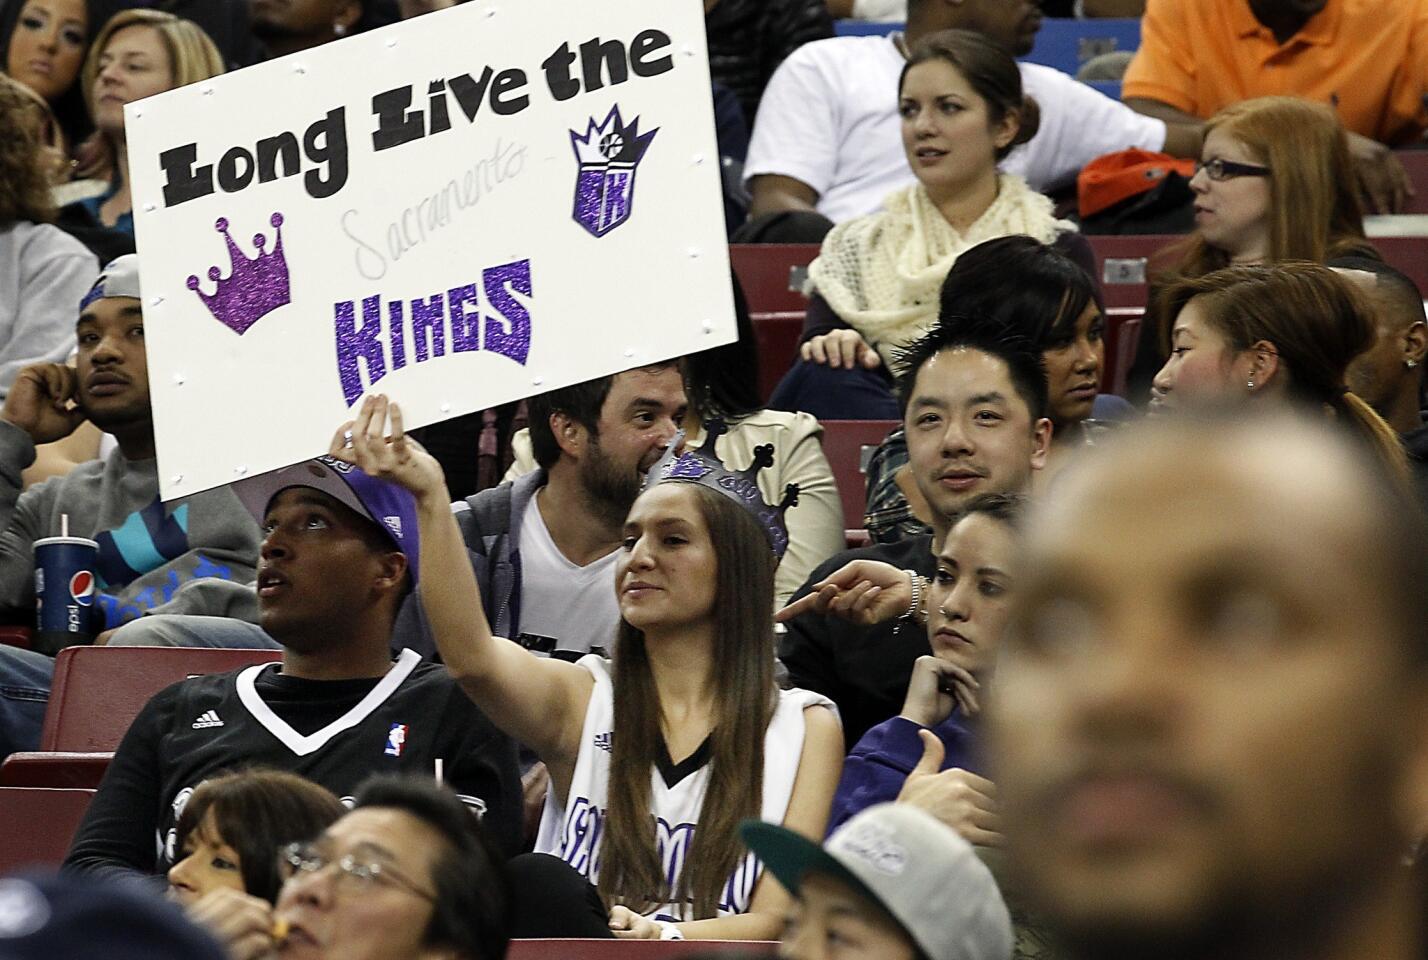 A fan holds up a sign that pleads with the Sacramento Kings to stay put rather than moving out of town.